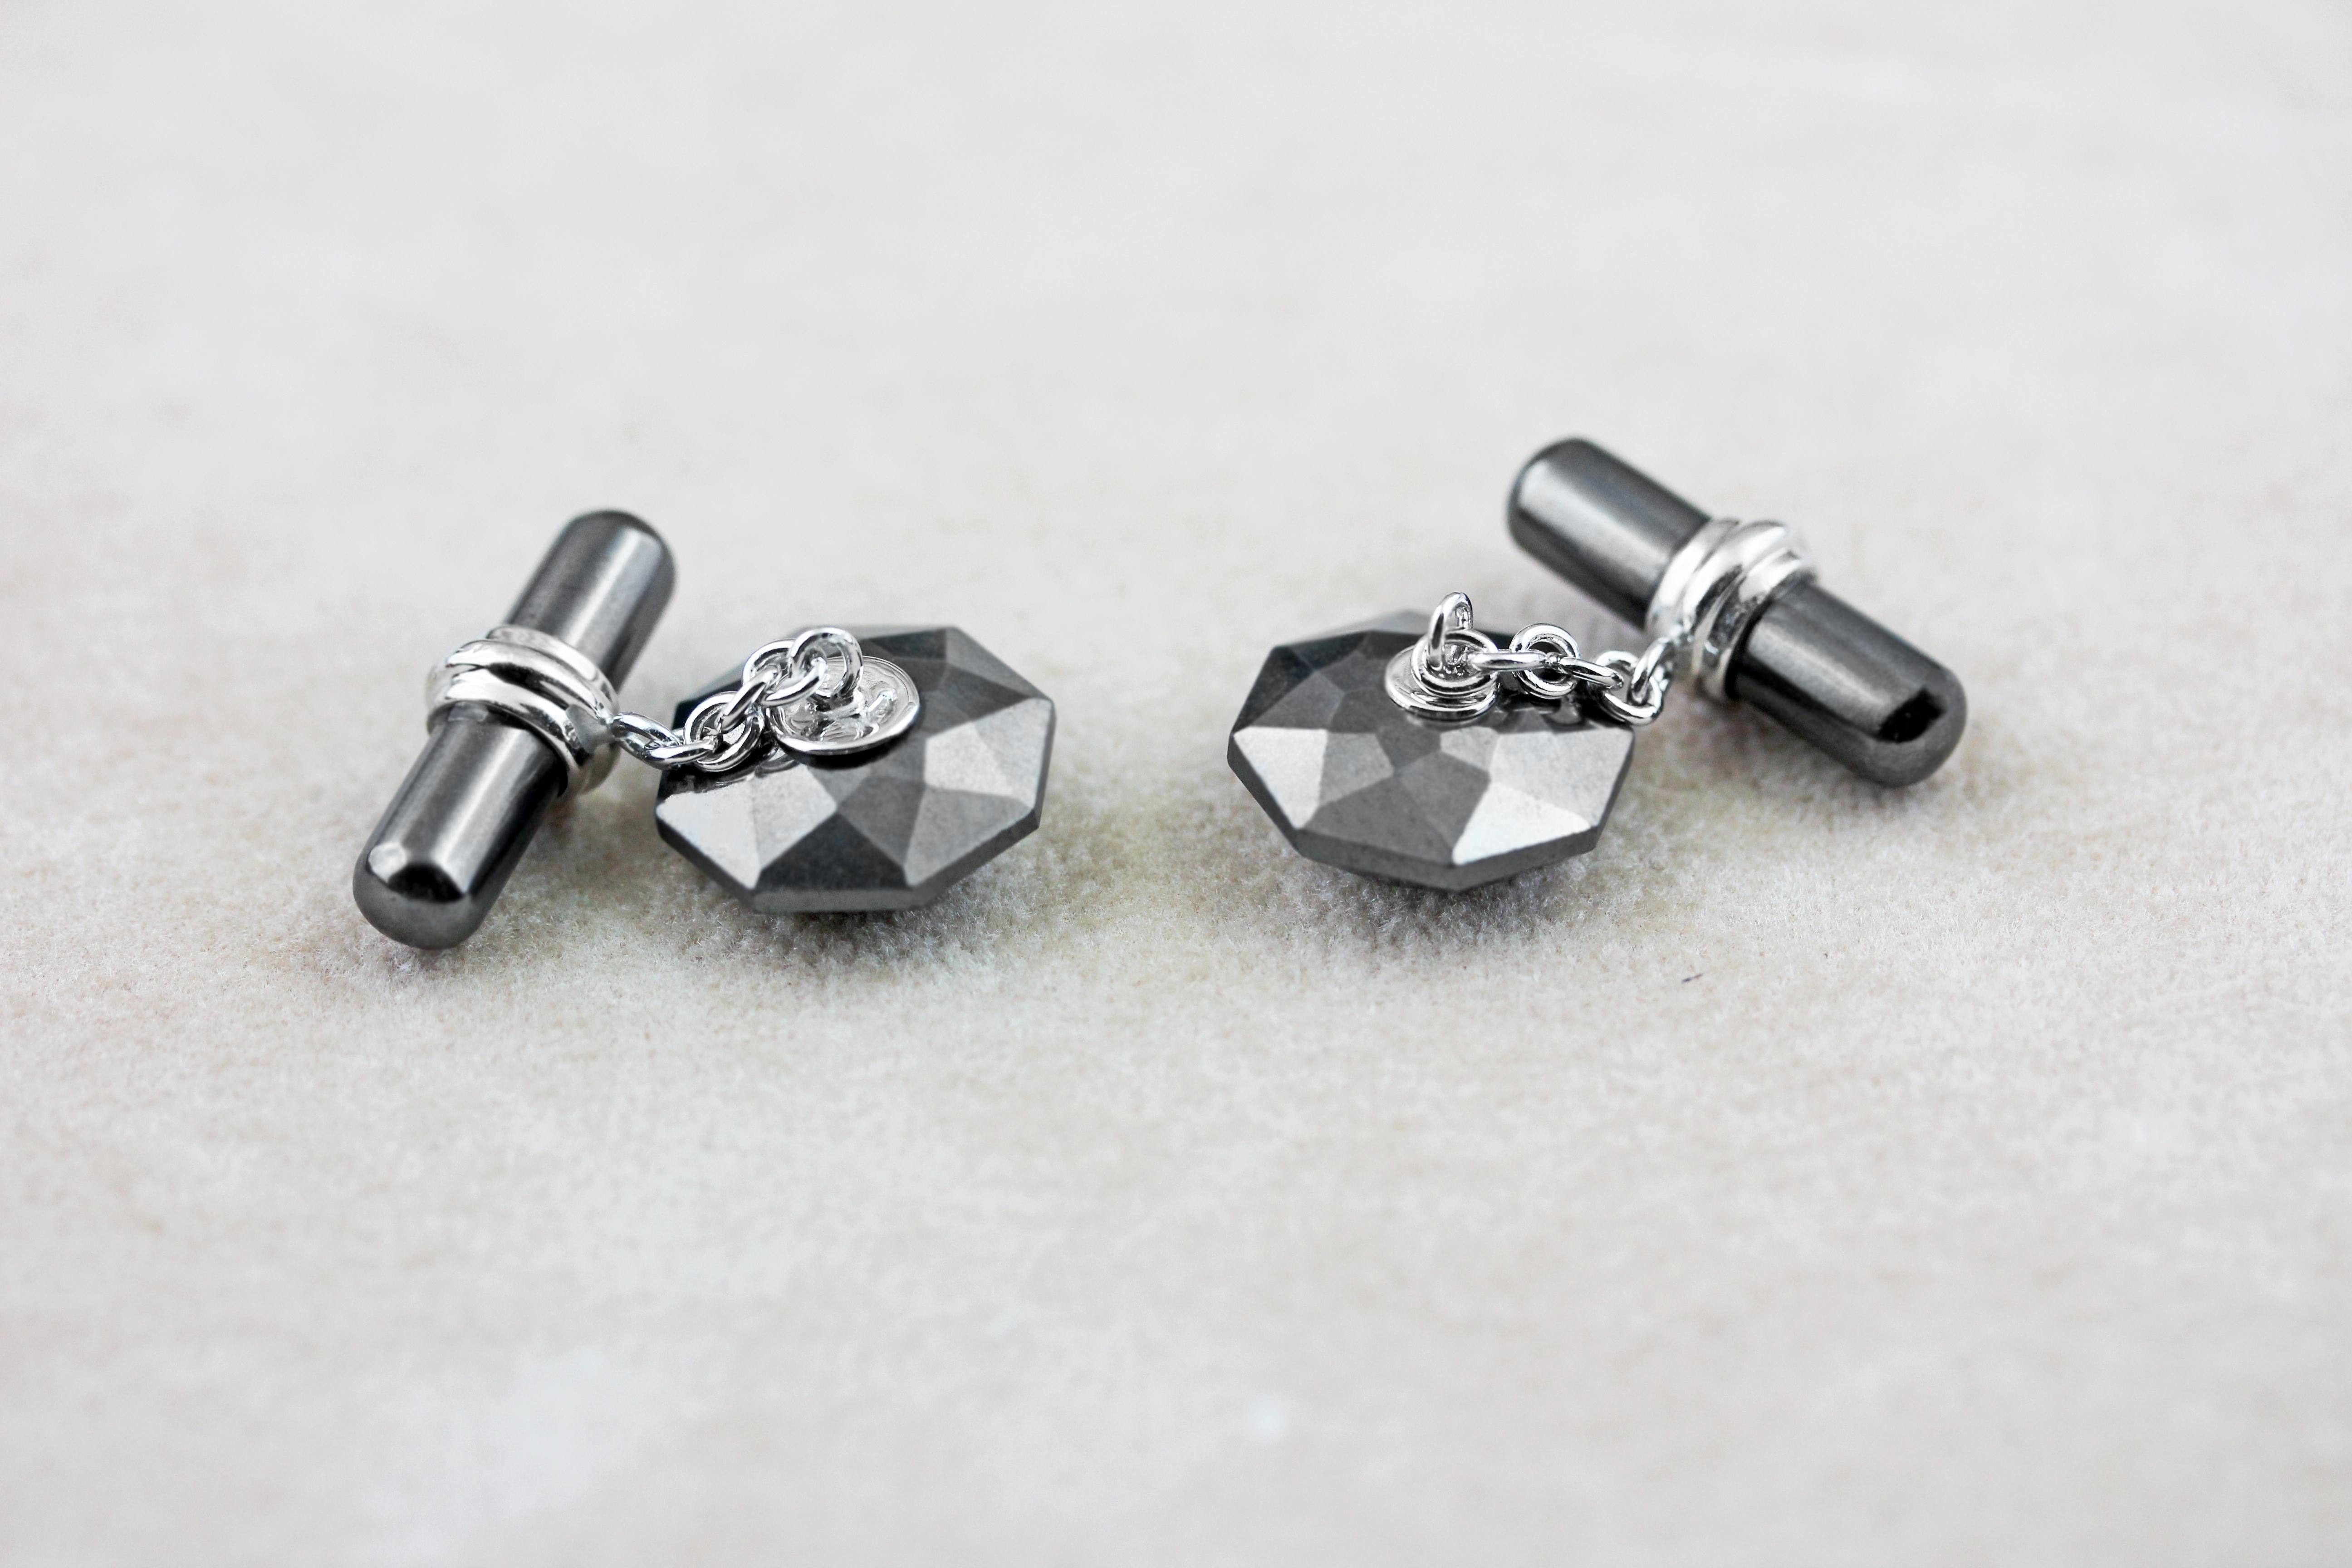 The striking black shade of hematite gives the classic design of these cufflinks a modern edge. 
The front face is shaped as a convex octagon, whose many cuts beautifully reflect light, while the center is adorned with a cabochon emerald. 
The